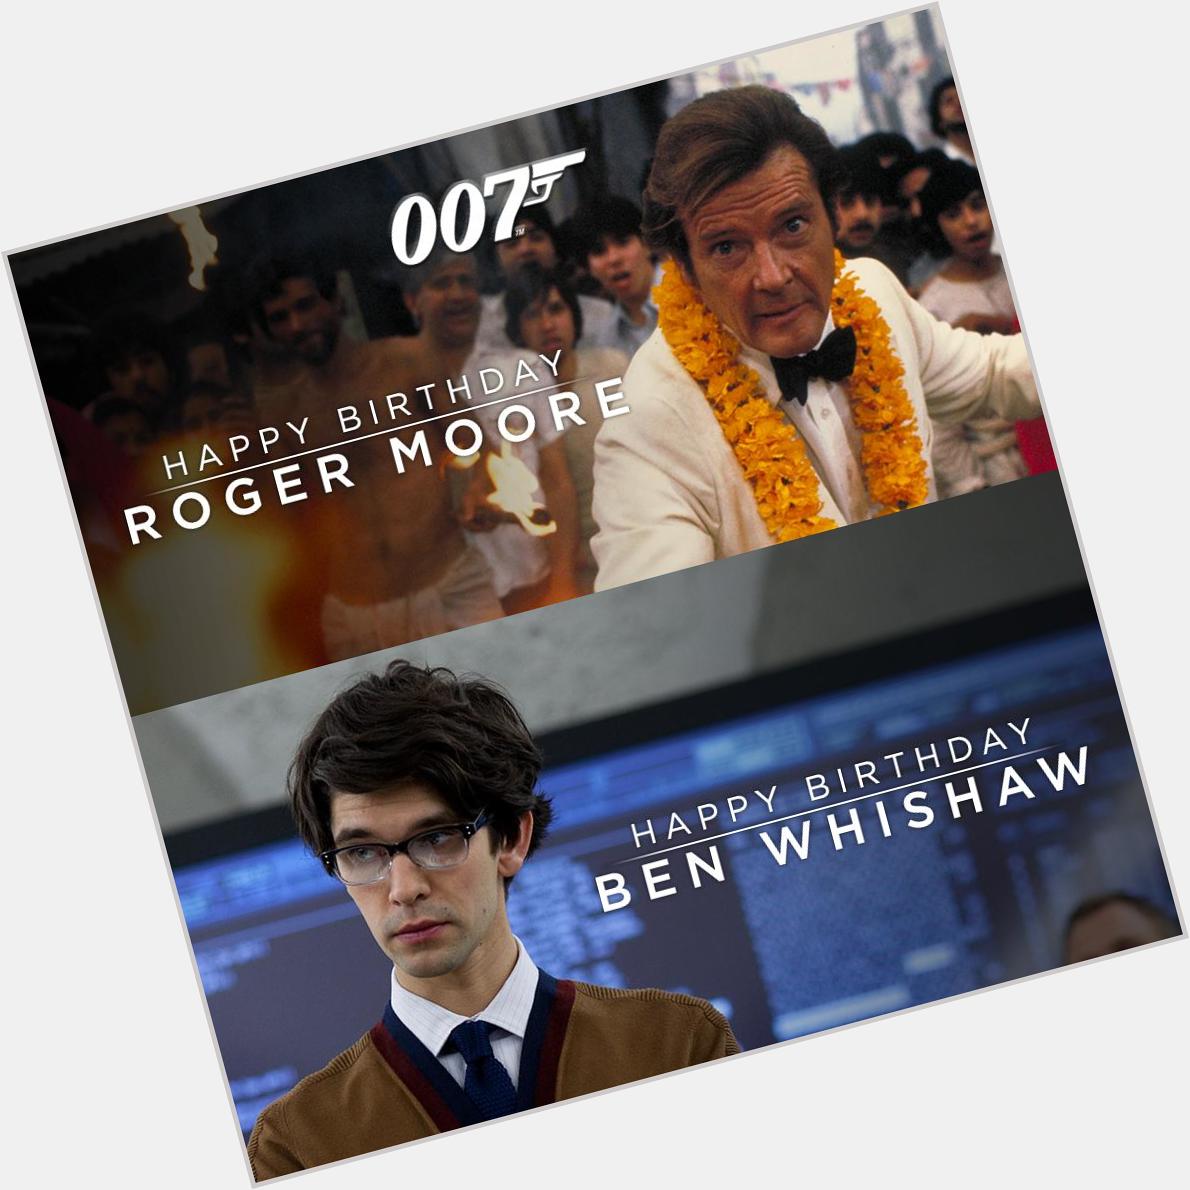 Somebody here seems to hate Roger Moore...  Happy Birthday to Sir Roger Moore and Ben Whishaw. 